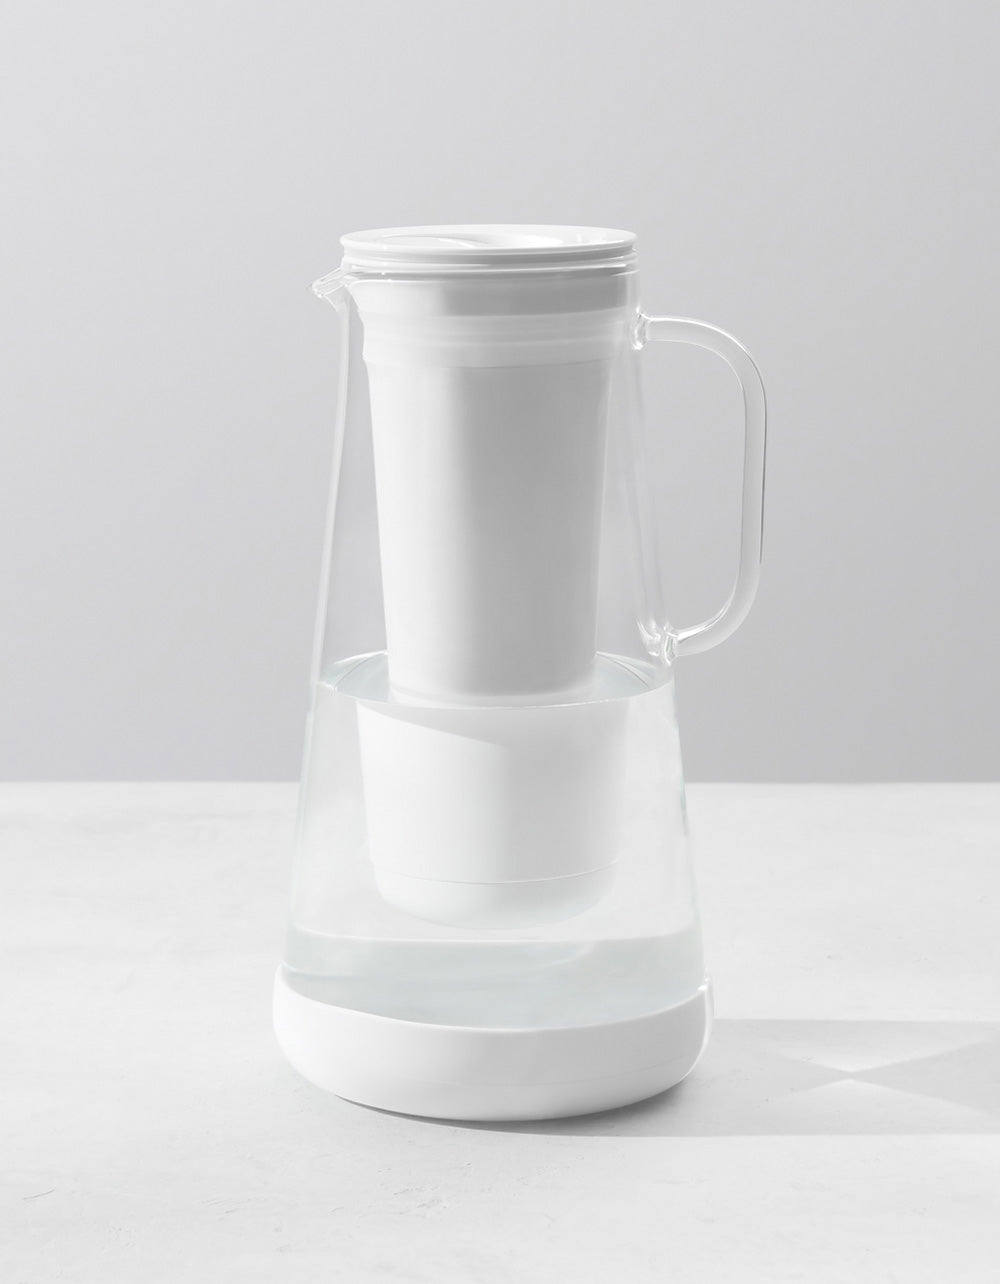 Beautiful by PUR 12 Cup Pitcher Water Filtration System, White